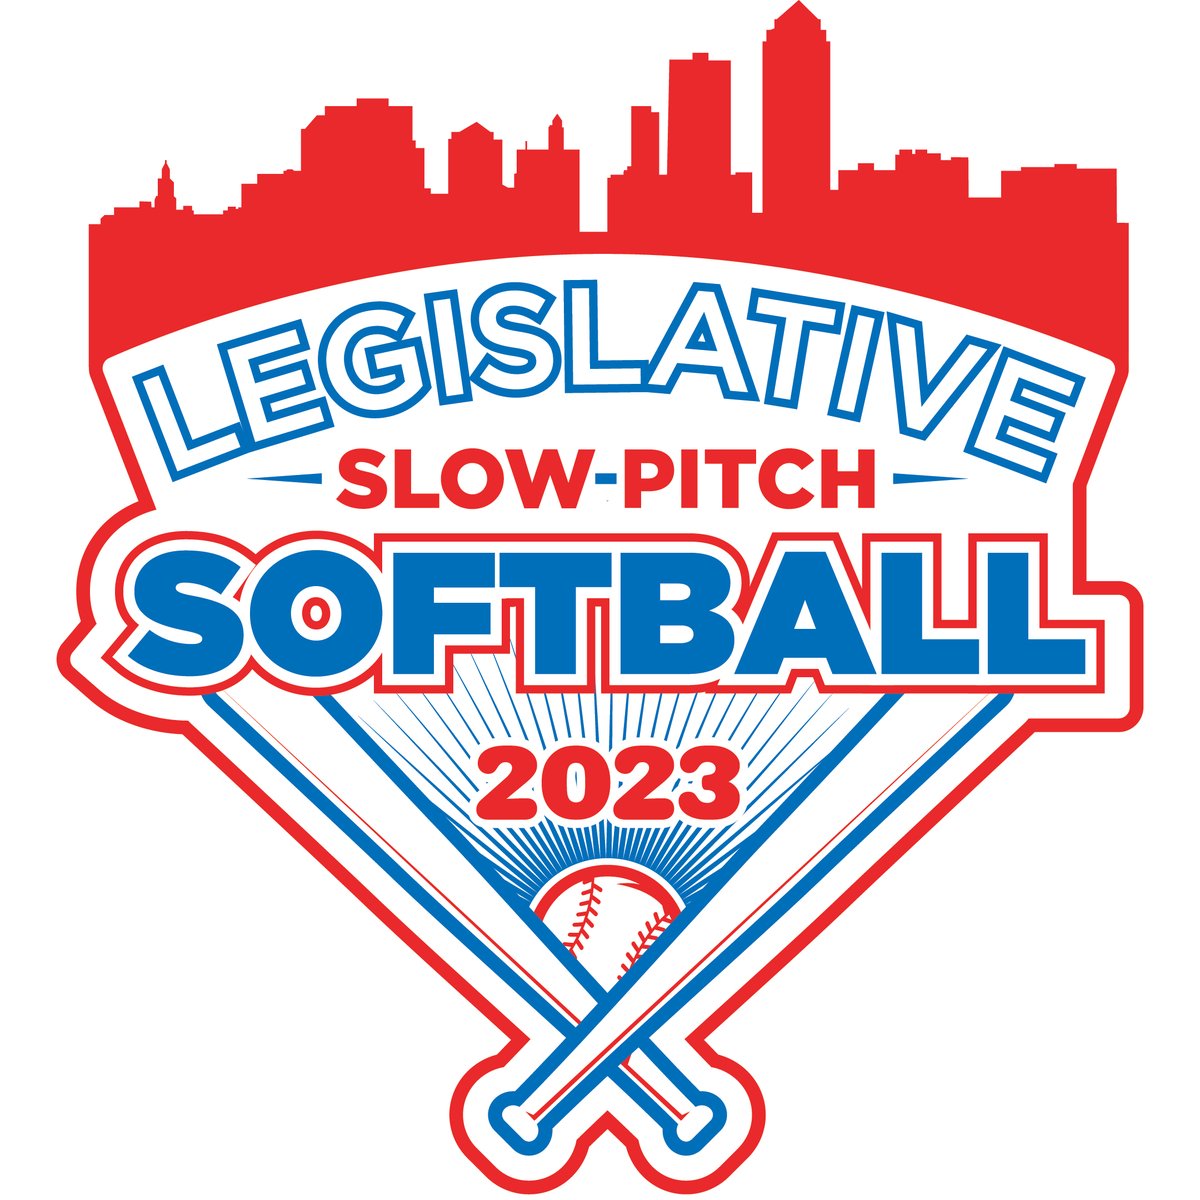 The Greater Des Moines Partnership has announced that the second annual Iowa Legislative Slow-Pitch Softball Game will take place on Sunday, June 4 at Principal Park. bit.ly/3UvUh5S #DSMUSA